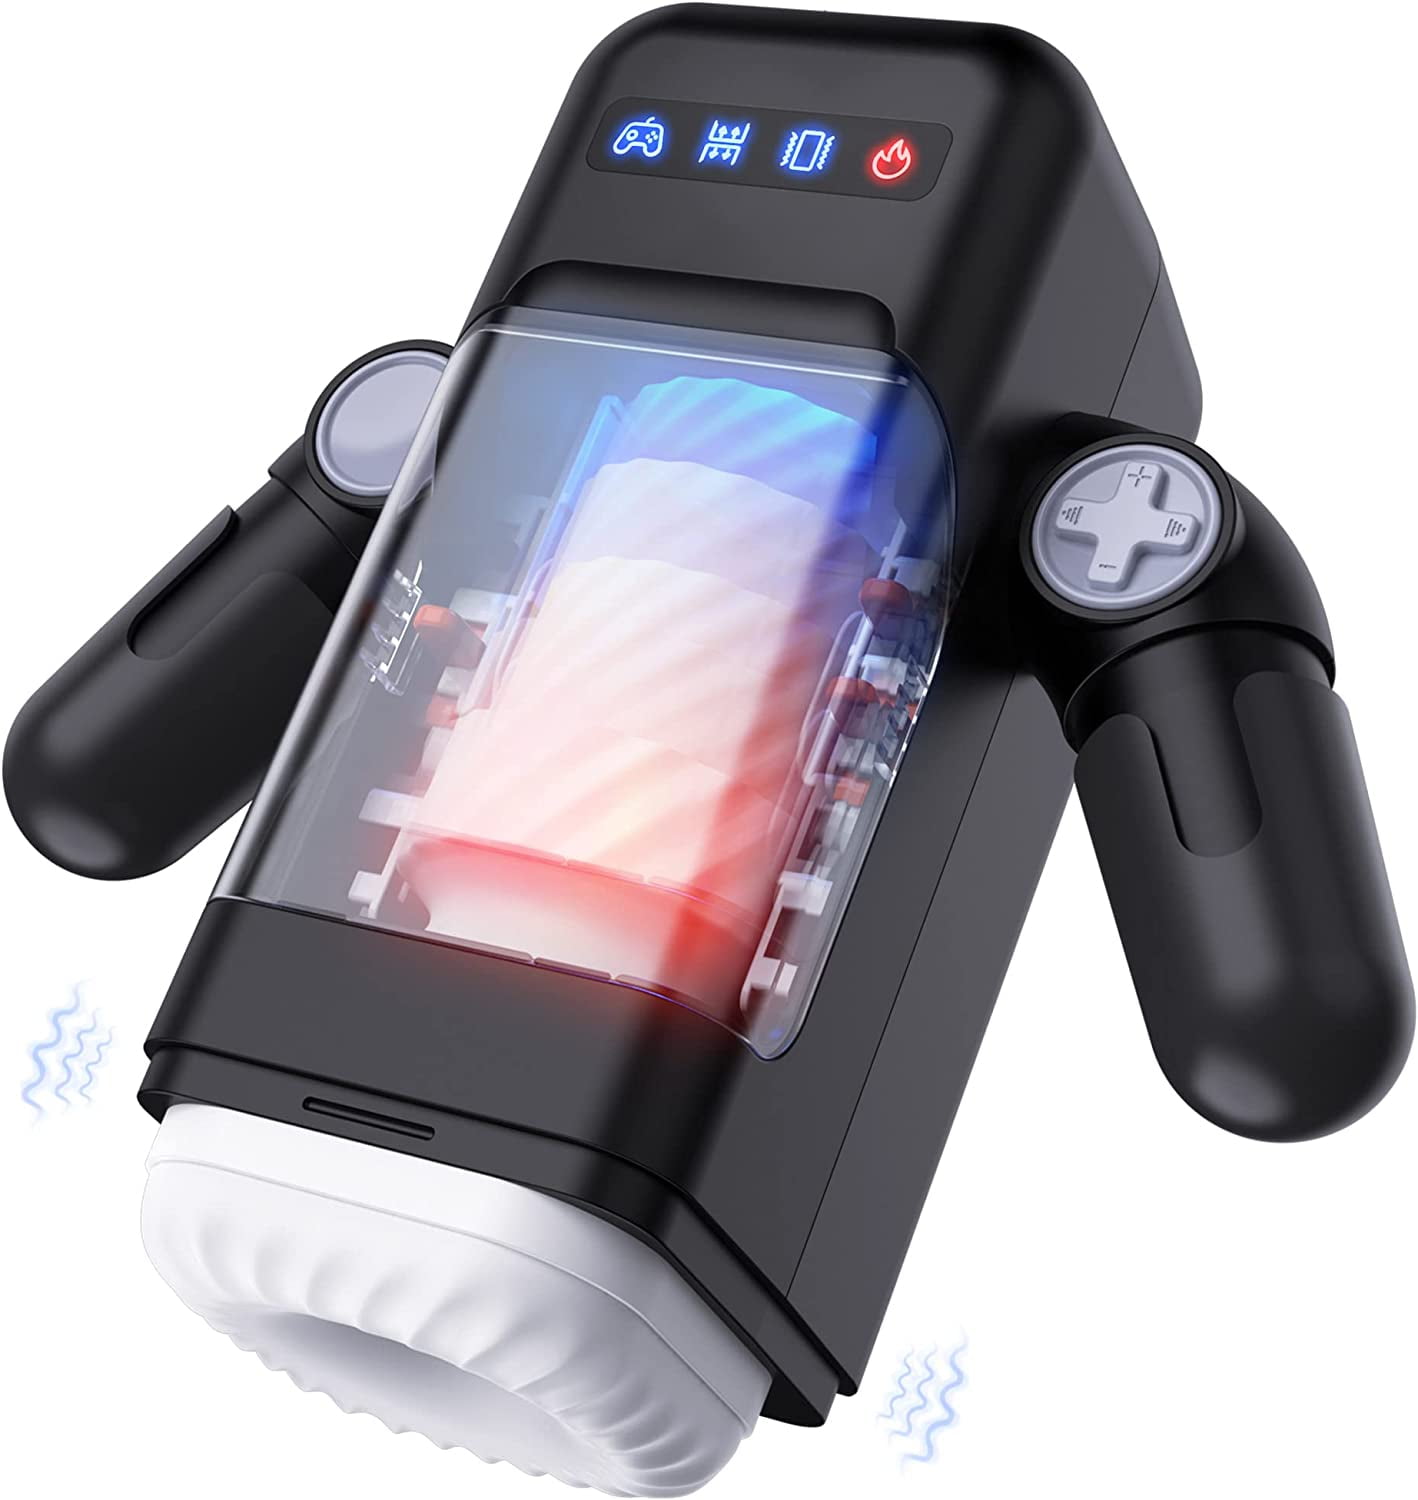 Automatic Male Masturbator, AMOVIBE Male Masturbators Cup with 10 Thrusting and Vibration Modes, Sex Toys for Men with Heating Function, Automatic Stroker with Phone Holder, Adult Sex Toys and Games